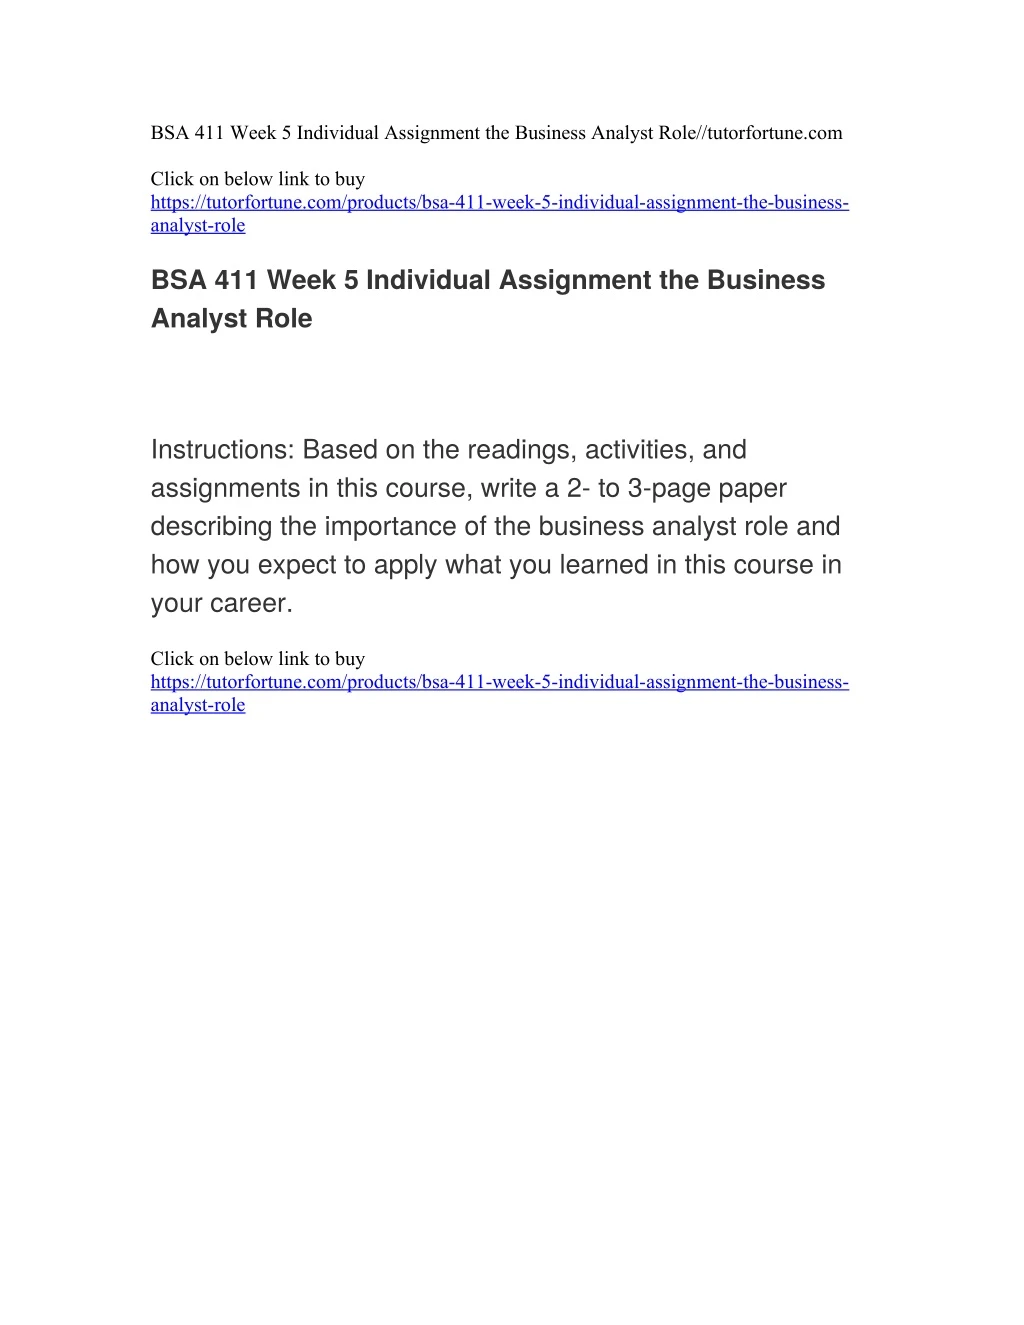 bsa 411 week 5 individual assignment the business